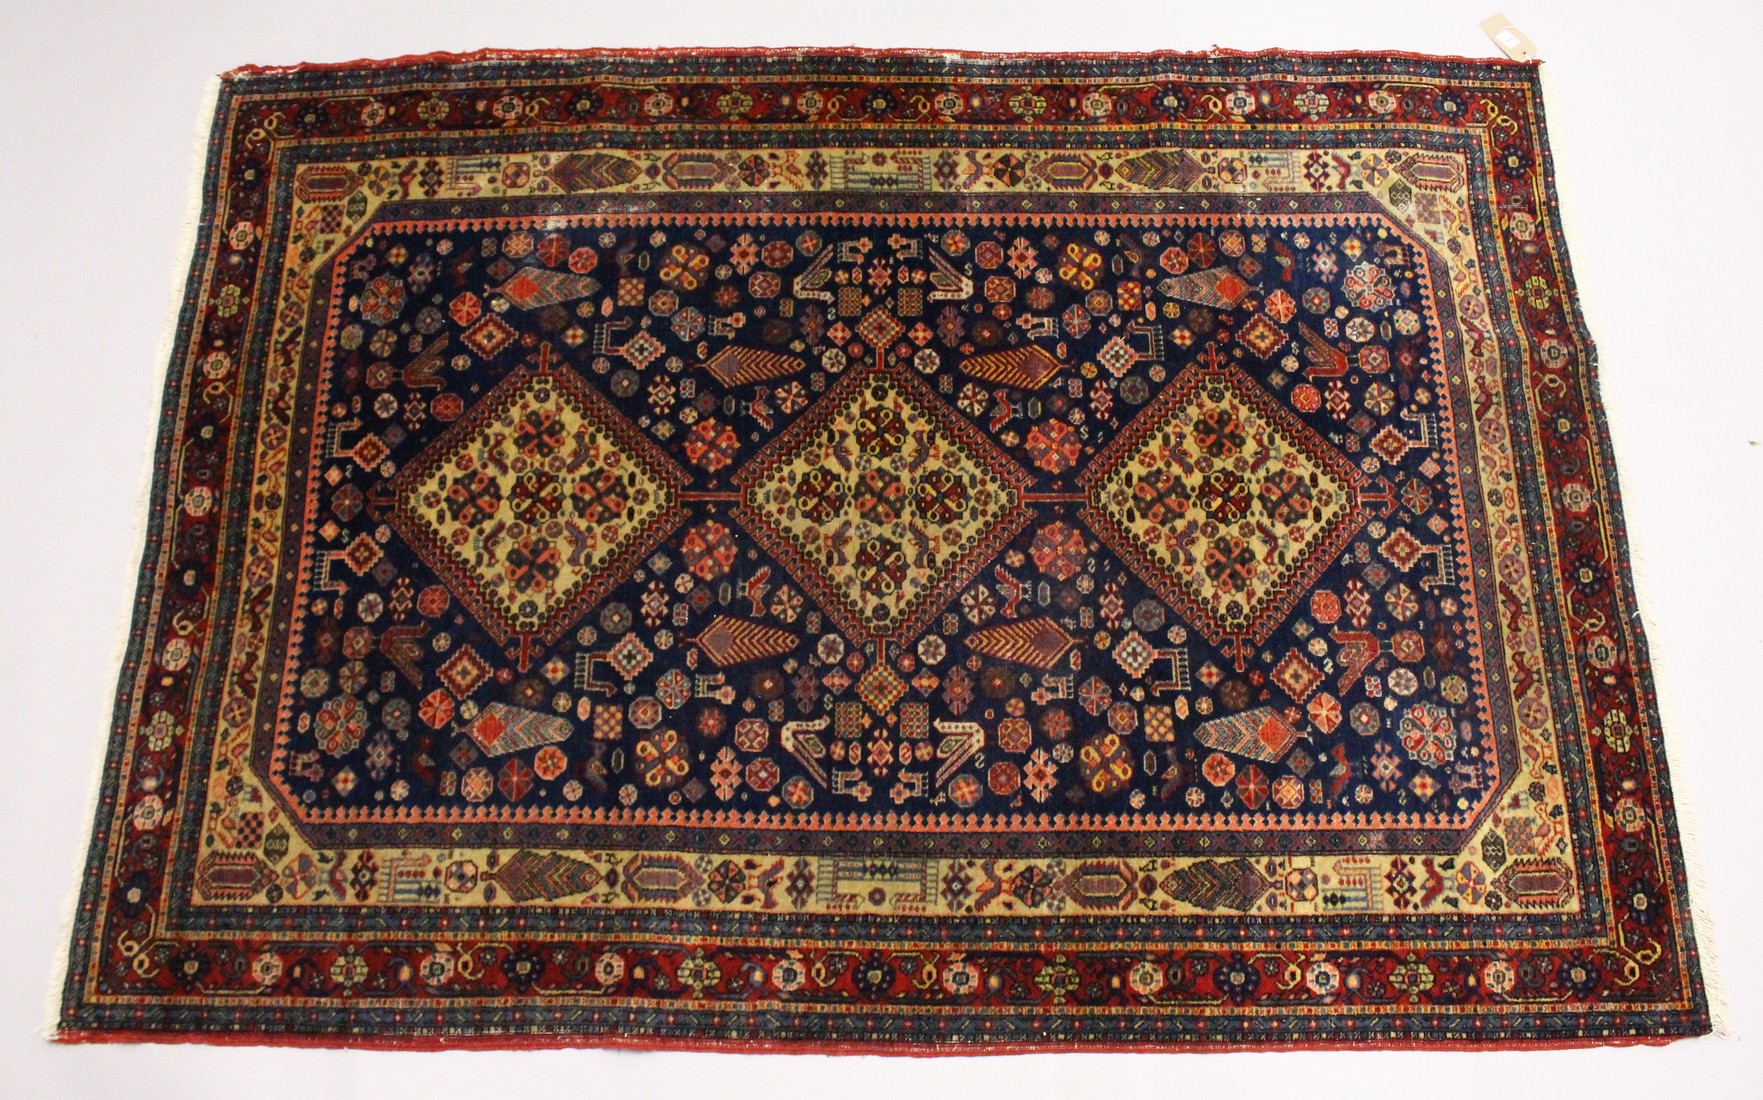 A PERSIAN QUASHQI CARPET, dark blue ground with three central diamond shaped medallions stylised